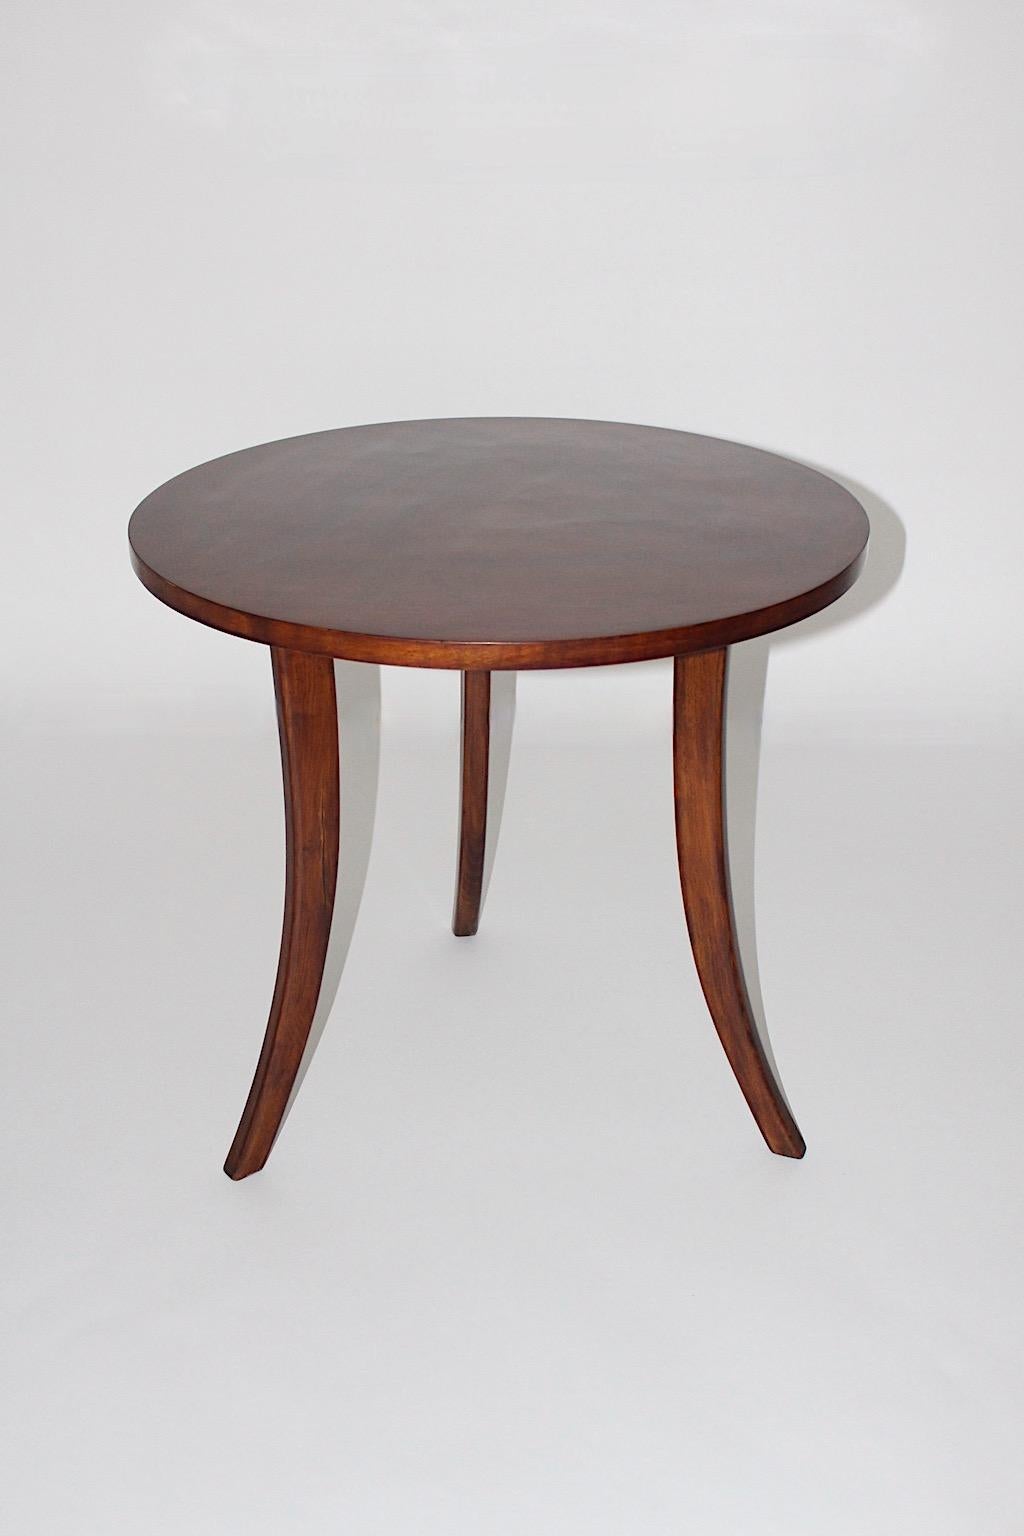 Art Deco Walnut Brown Vintage Coffee Table Side Table Josef Frank, 1930s, Vienna For Sale 2